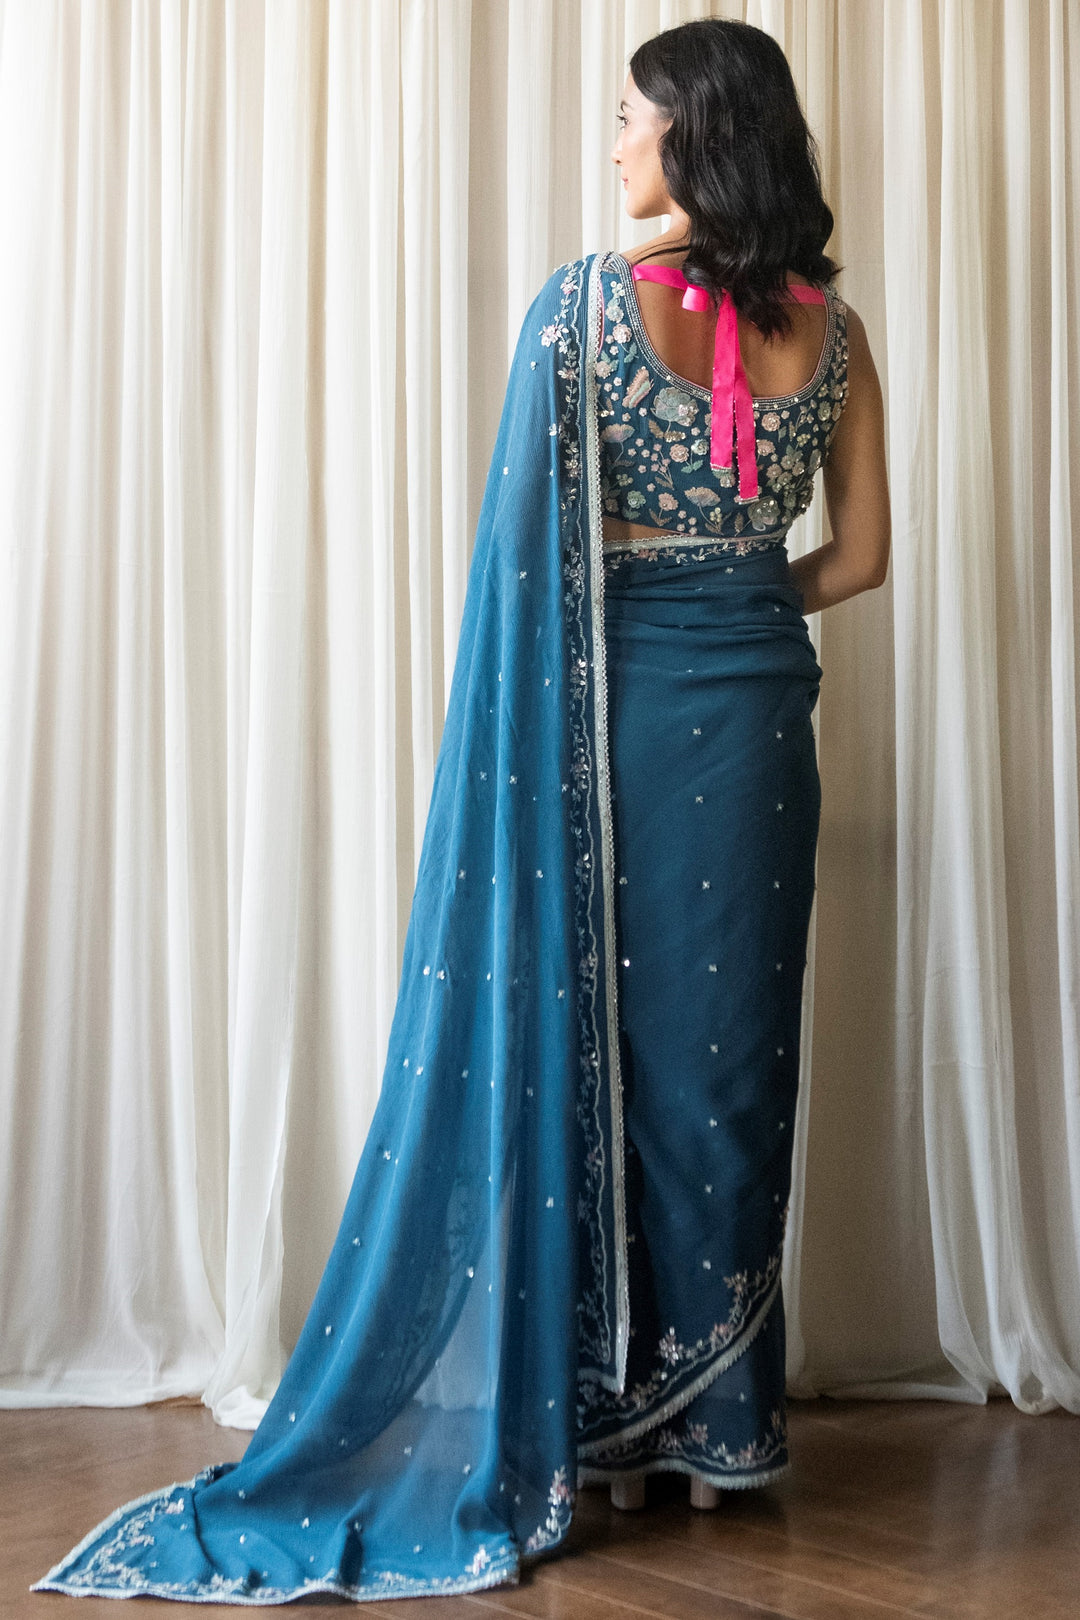 Blue Persian Garden Chiffon Saree with Embroidered Blouse